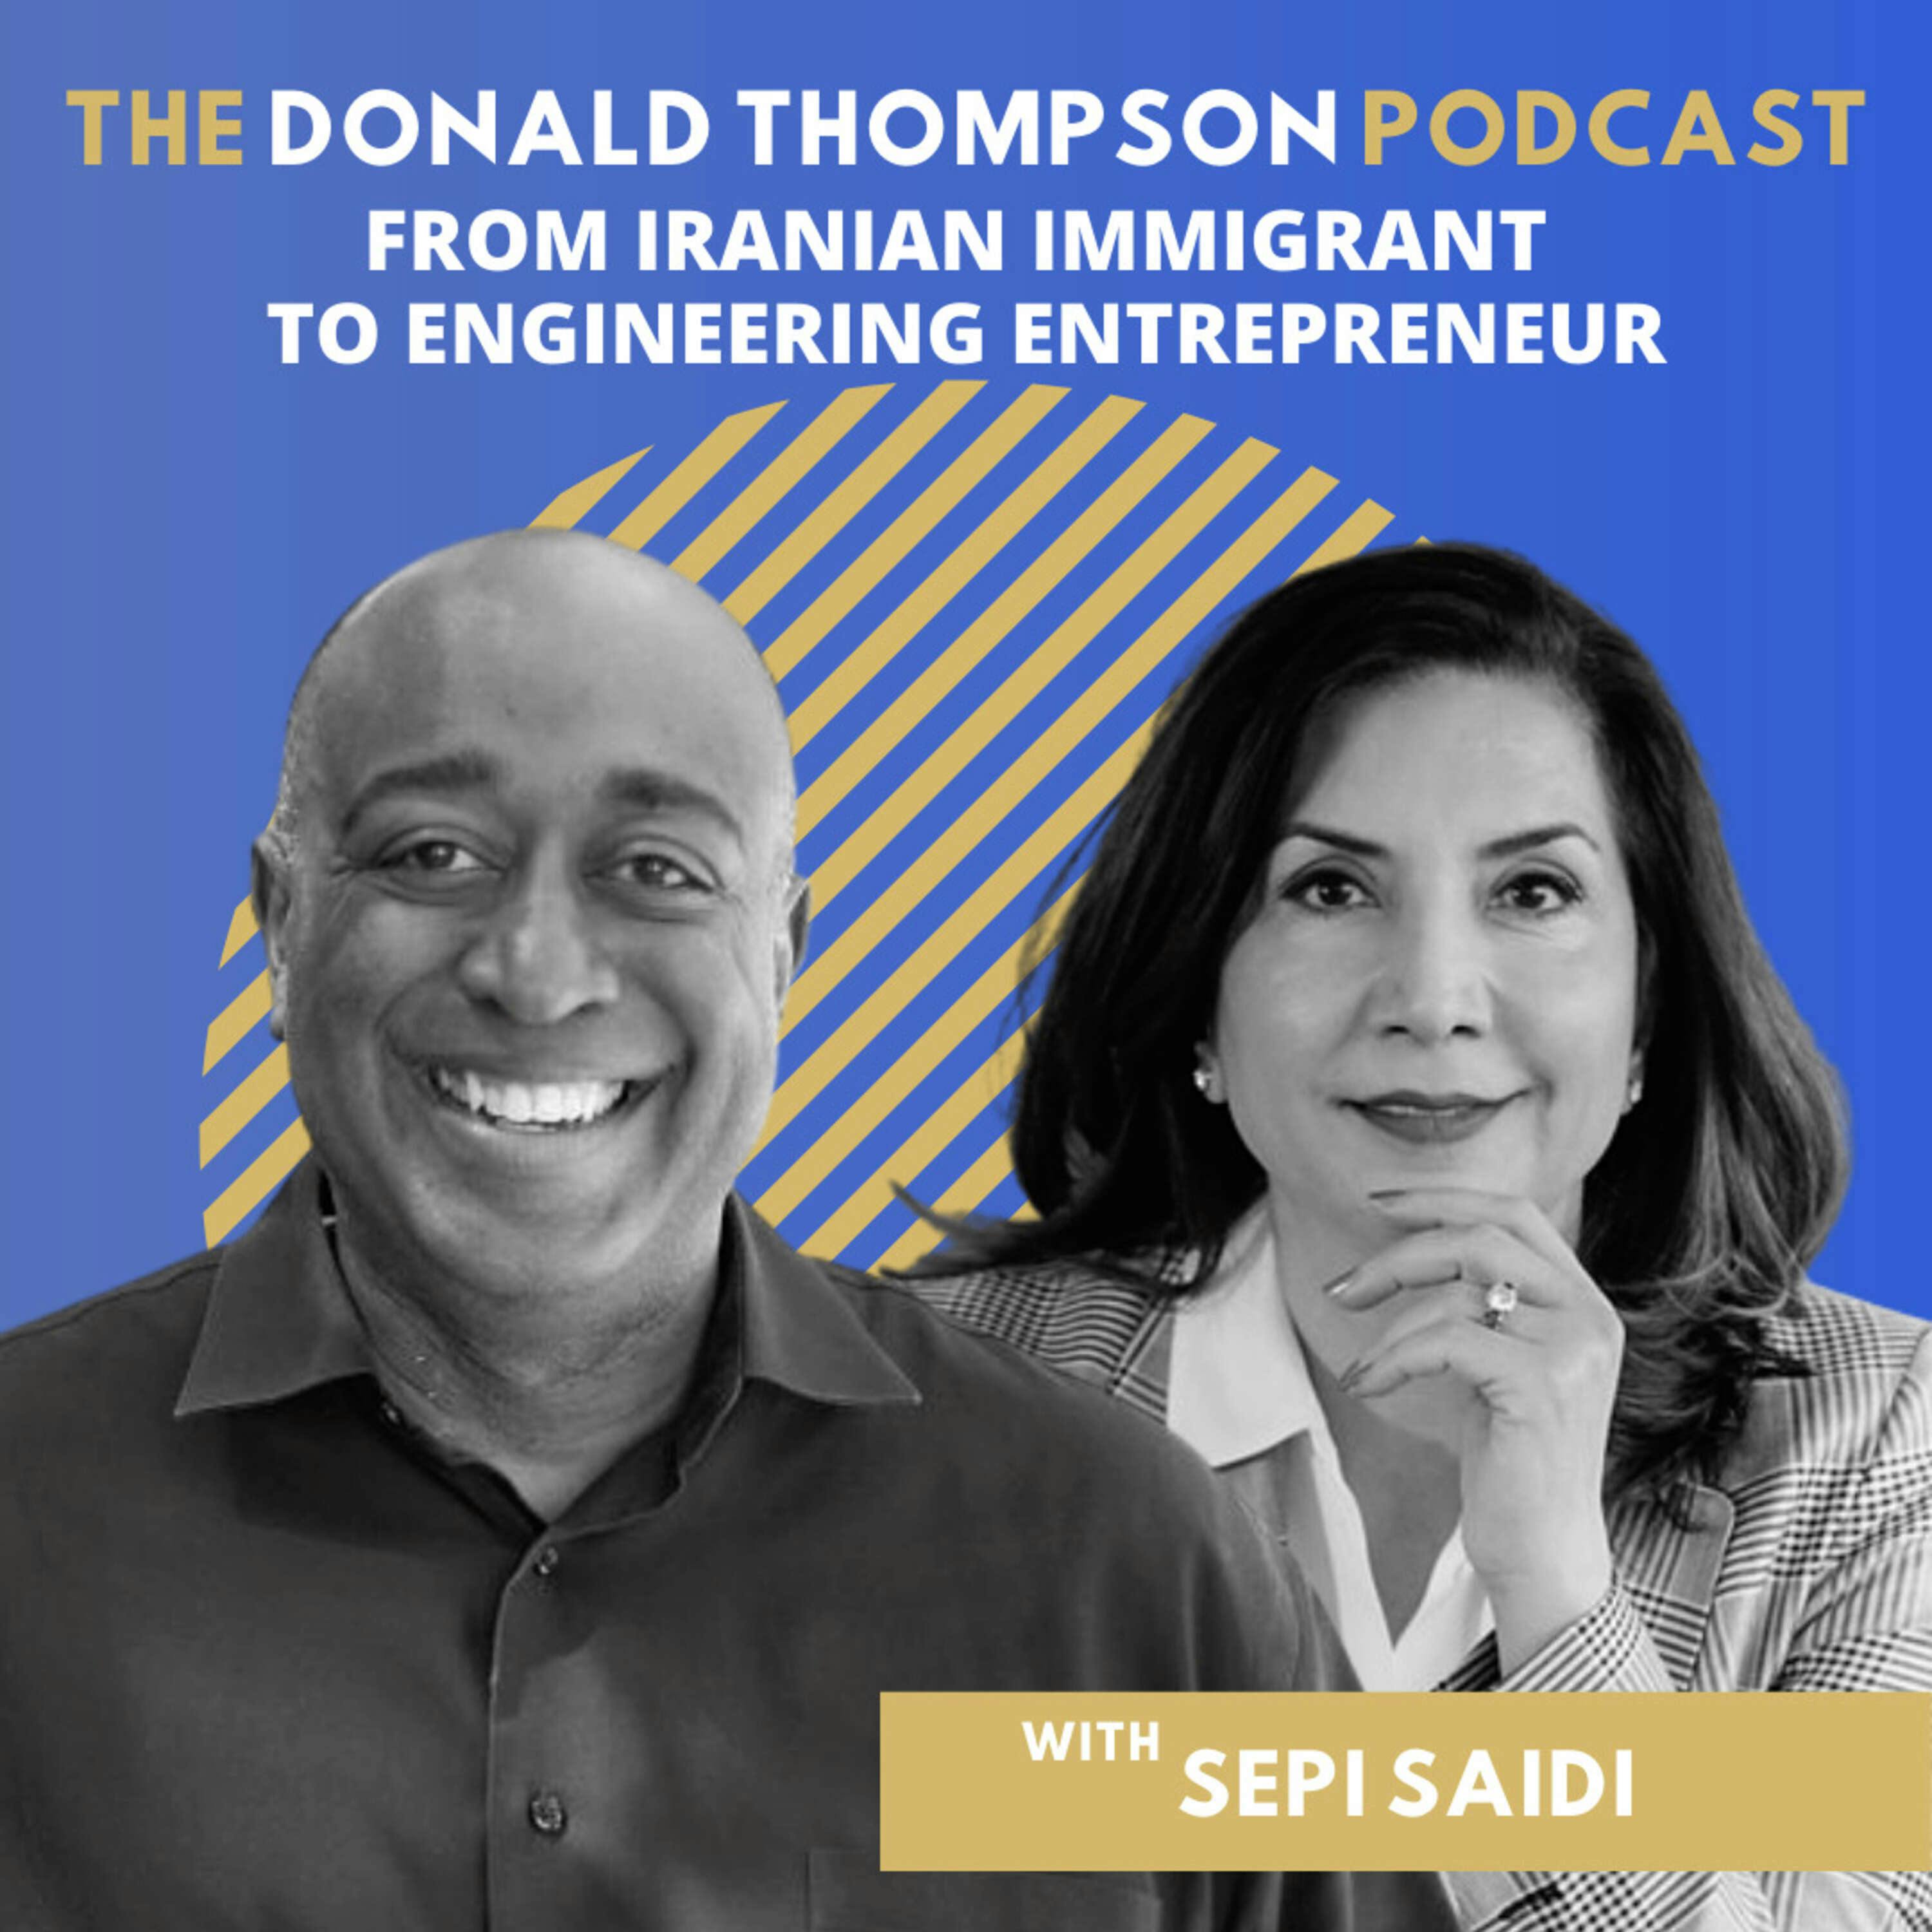 From Iranian Immigrant to Engineering Entrepreneur, with Sepi Saidi